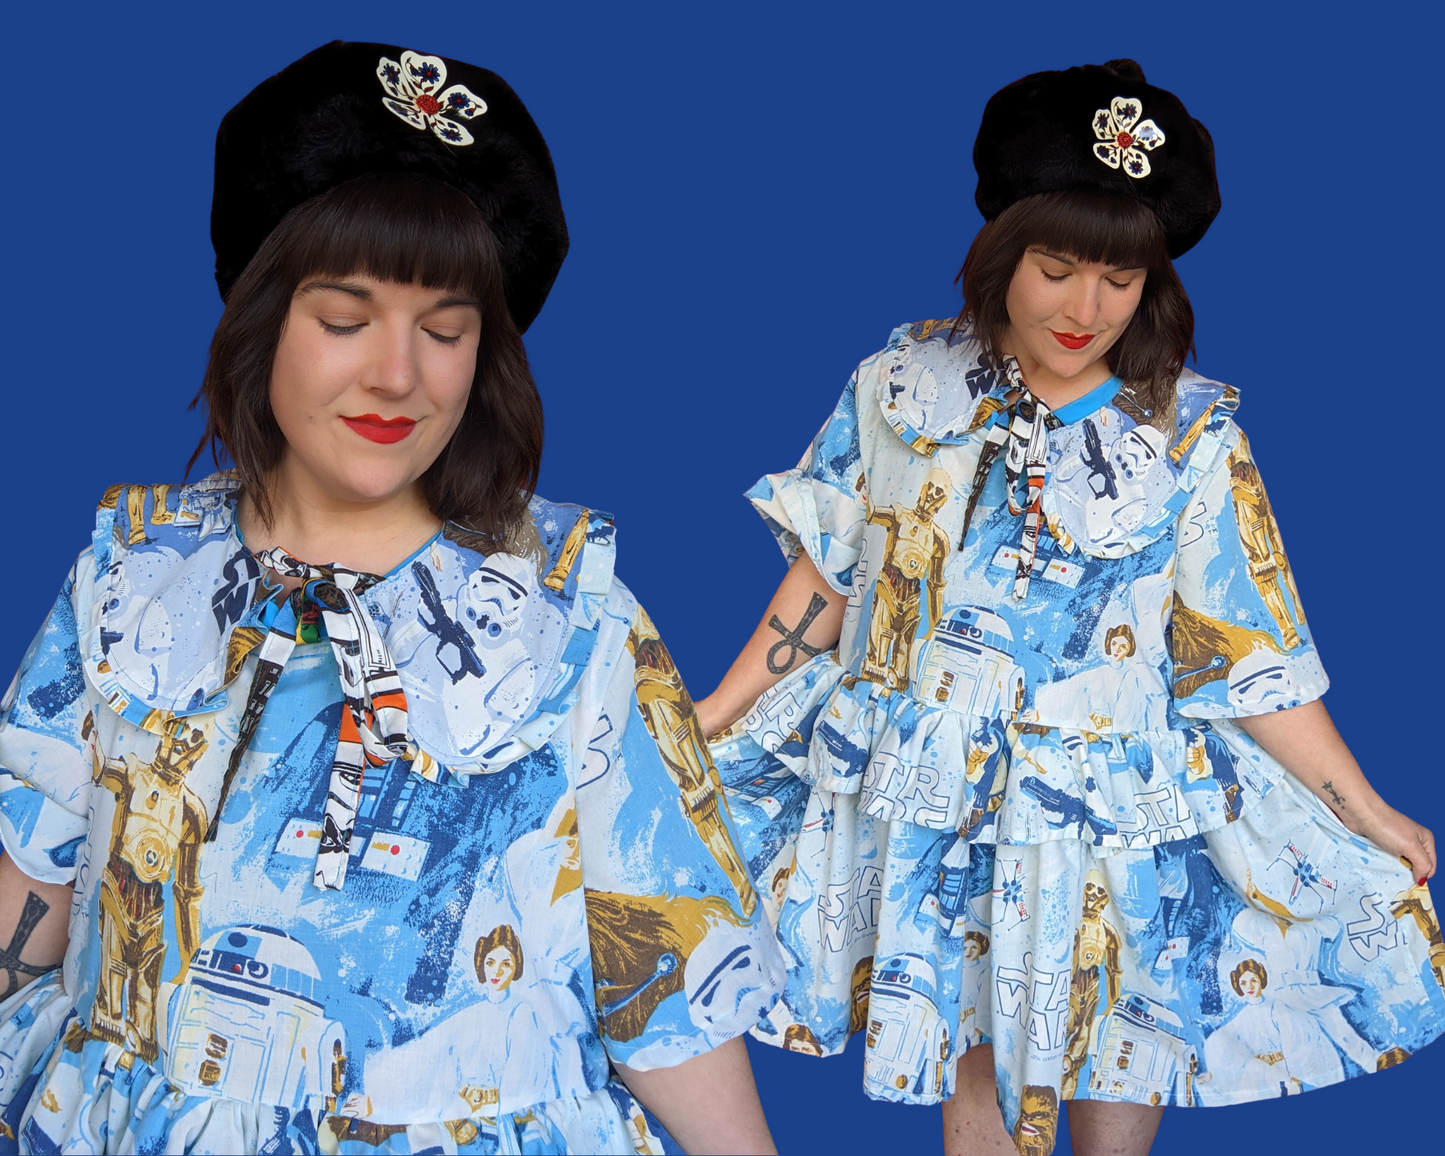 Handmade, Upcycled Vintage 1977 Star Wars, A New Hope Bedsheet Dress with Matching Detachable Collar Size 3XL